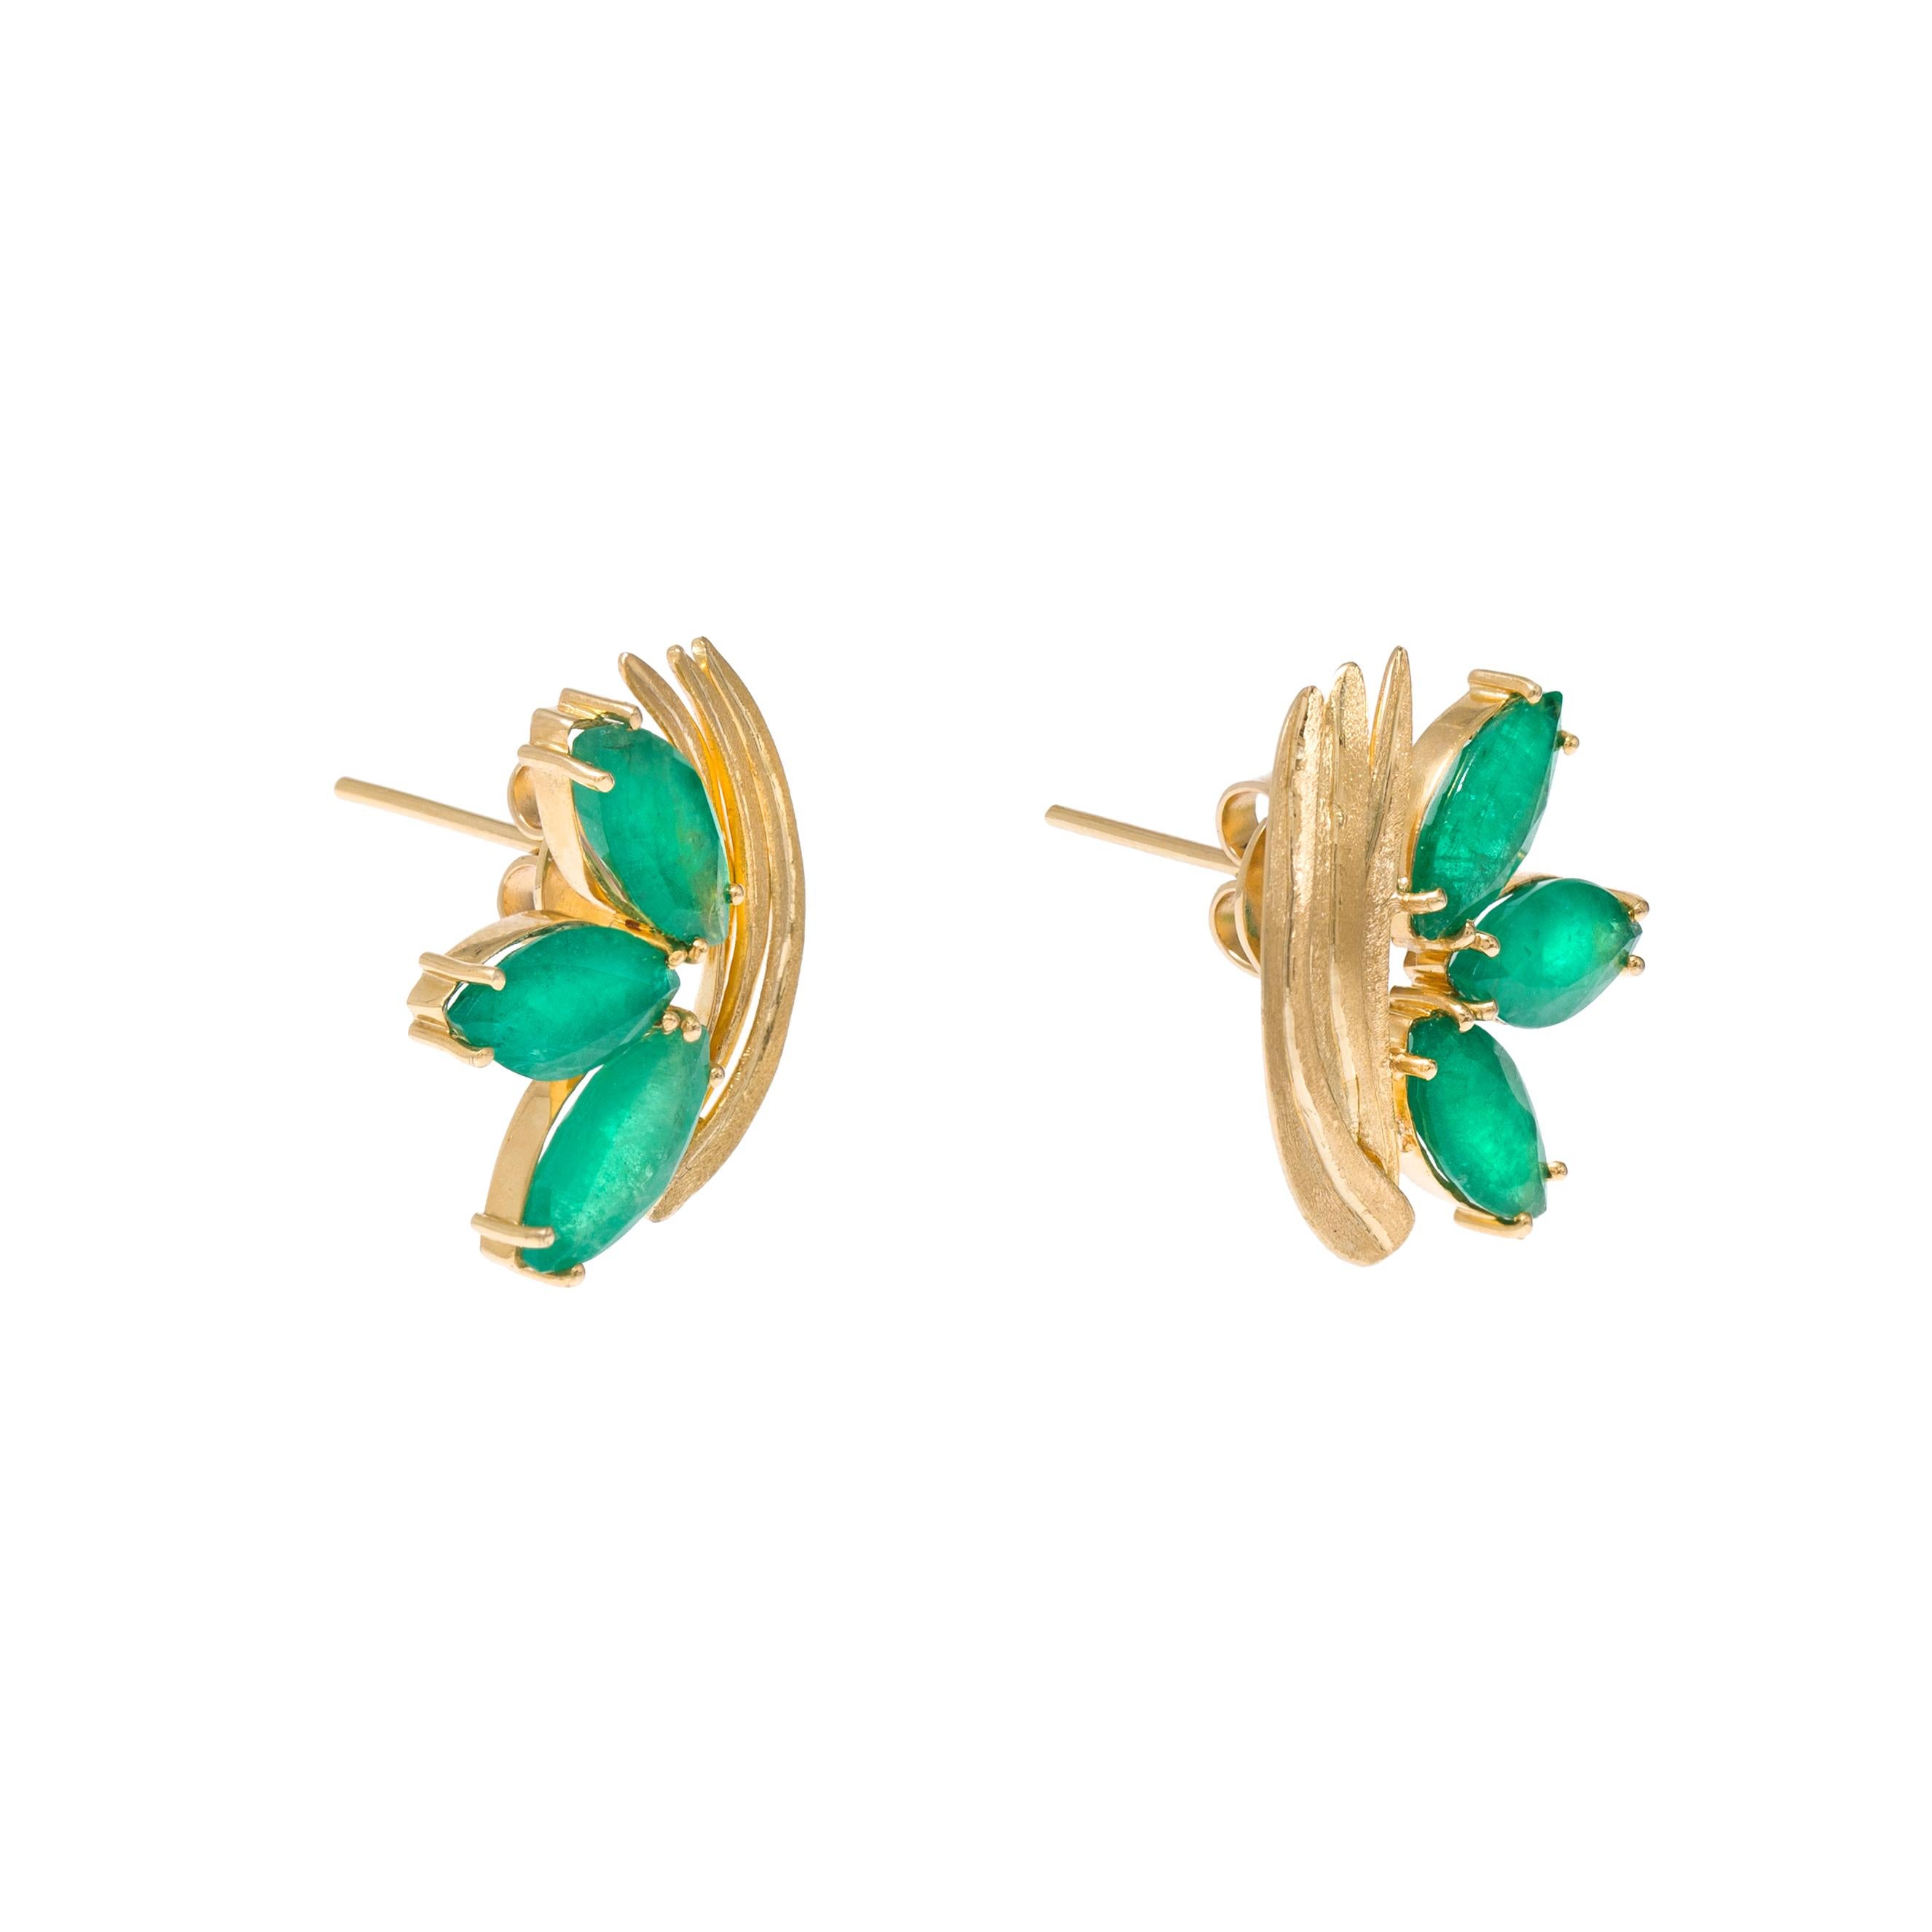 Earrings
Gold 18K 
Emerald
Handmade, matte finish and prong setting

Van Gogh uses very controlled short and sharp strokes to bring out the foliage in his paintings.  The complex tones of emeralds were an obvious choice to mirror the various shades